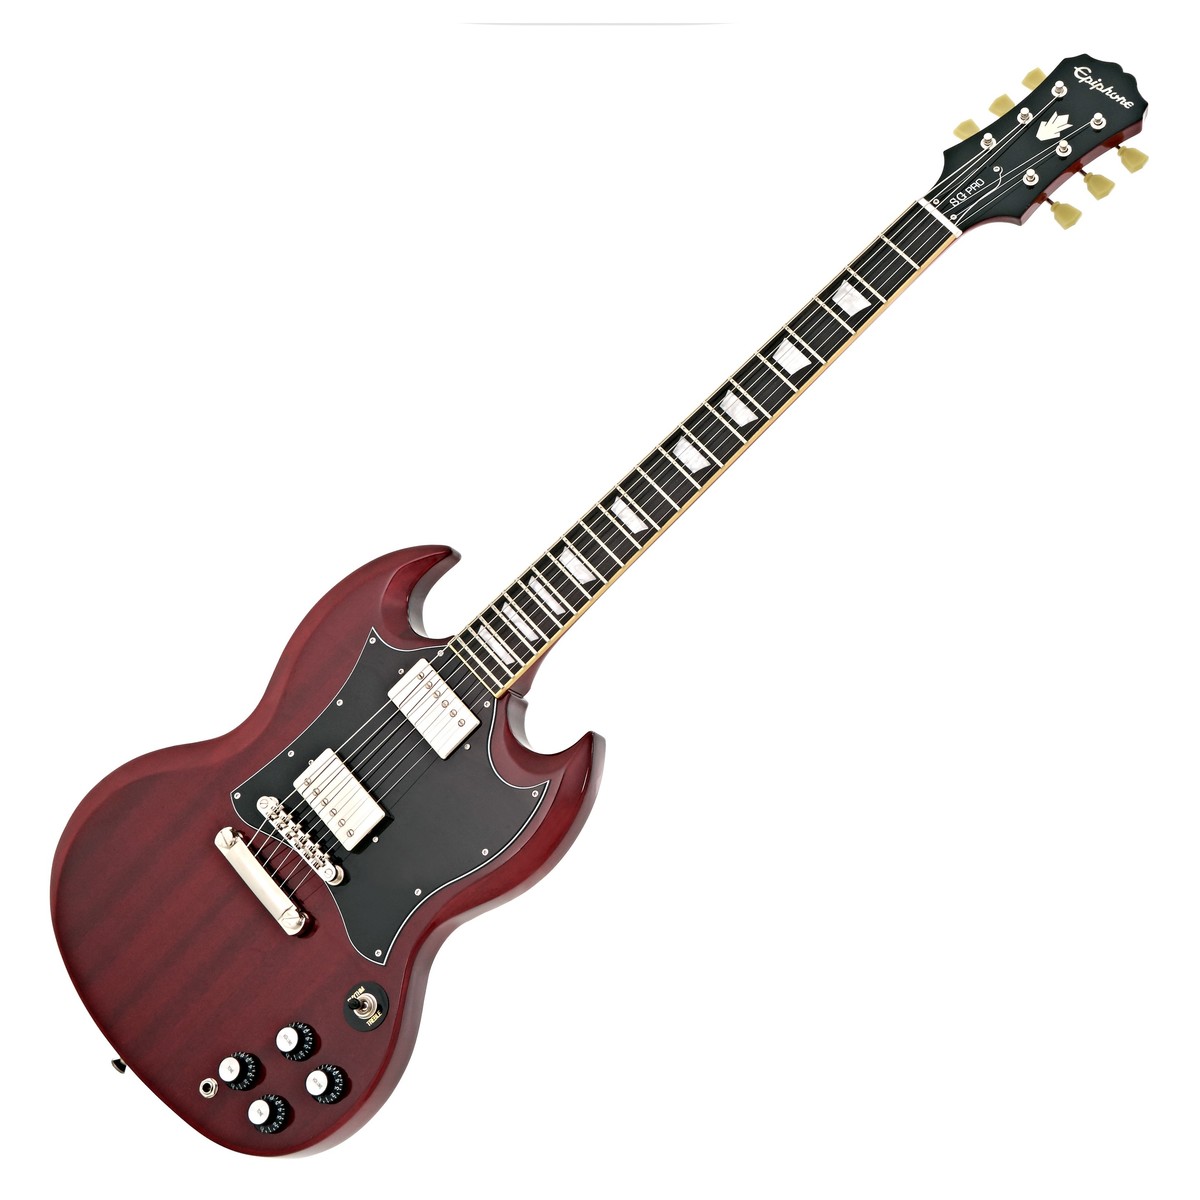 EPIPHONE Limited Edition Cherry 1966 G400 PRO SG Electric Guitar EG16CHNH3